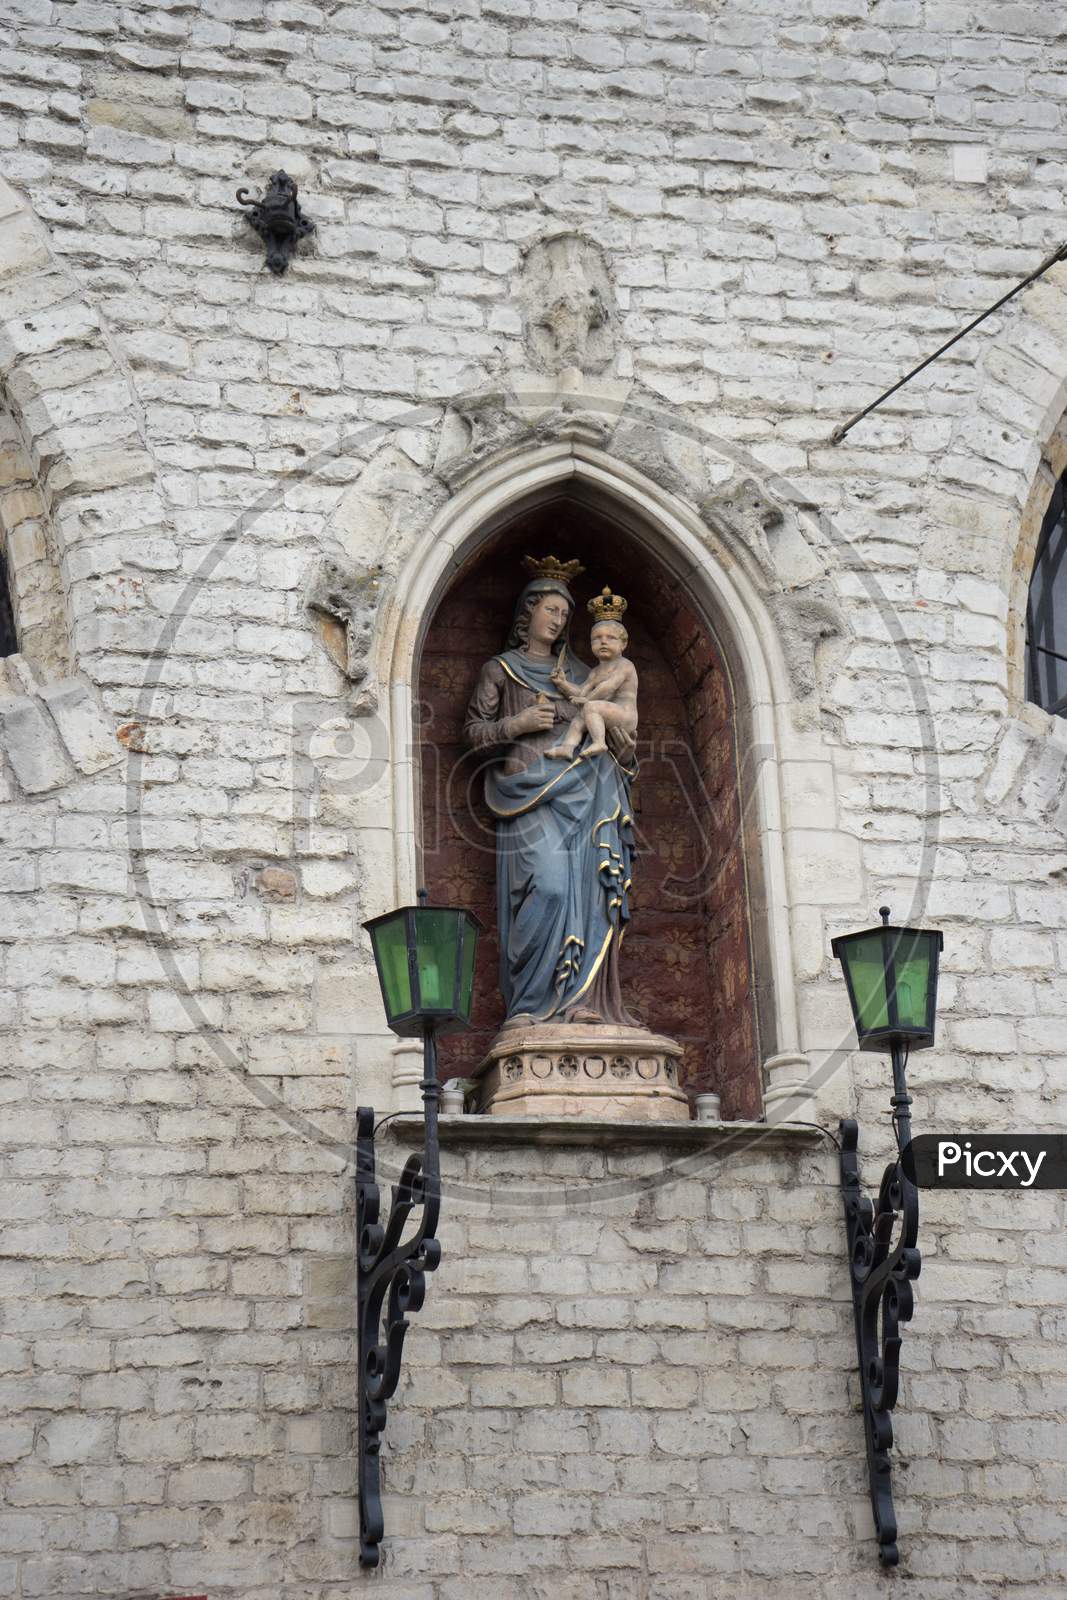 Sculpture Of Mary Holding Baby Jesus On A Wall In The City Of Ghent, Belgium